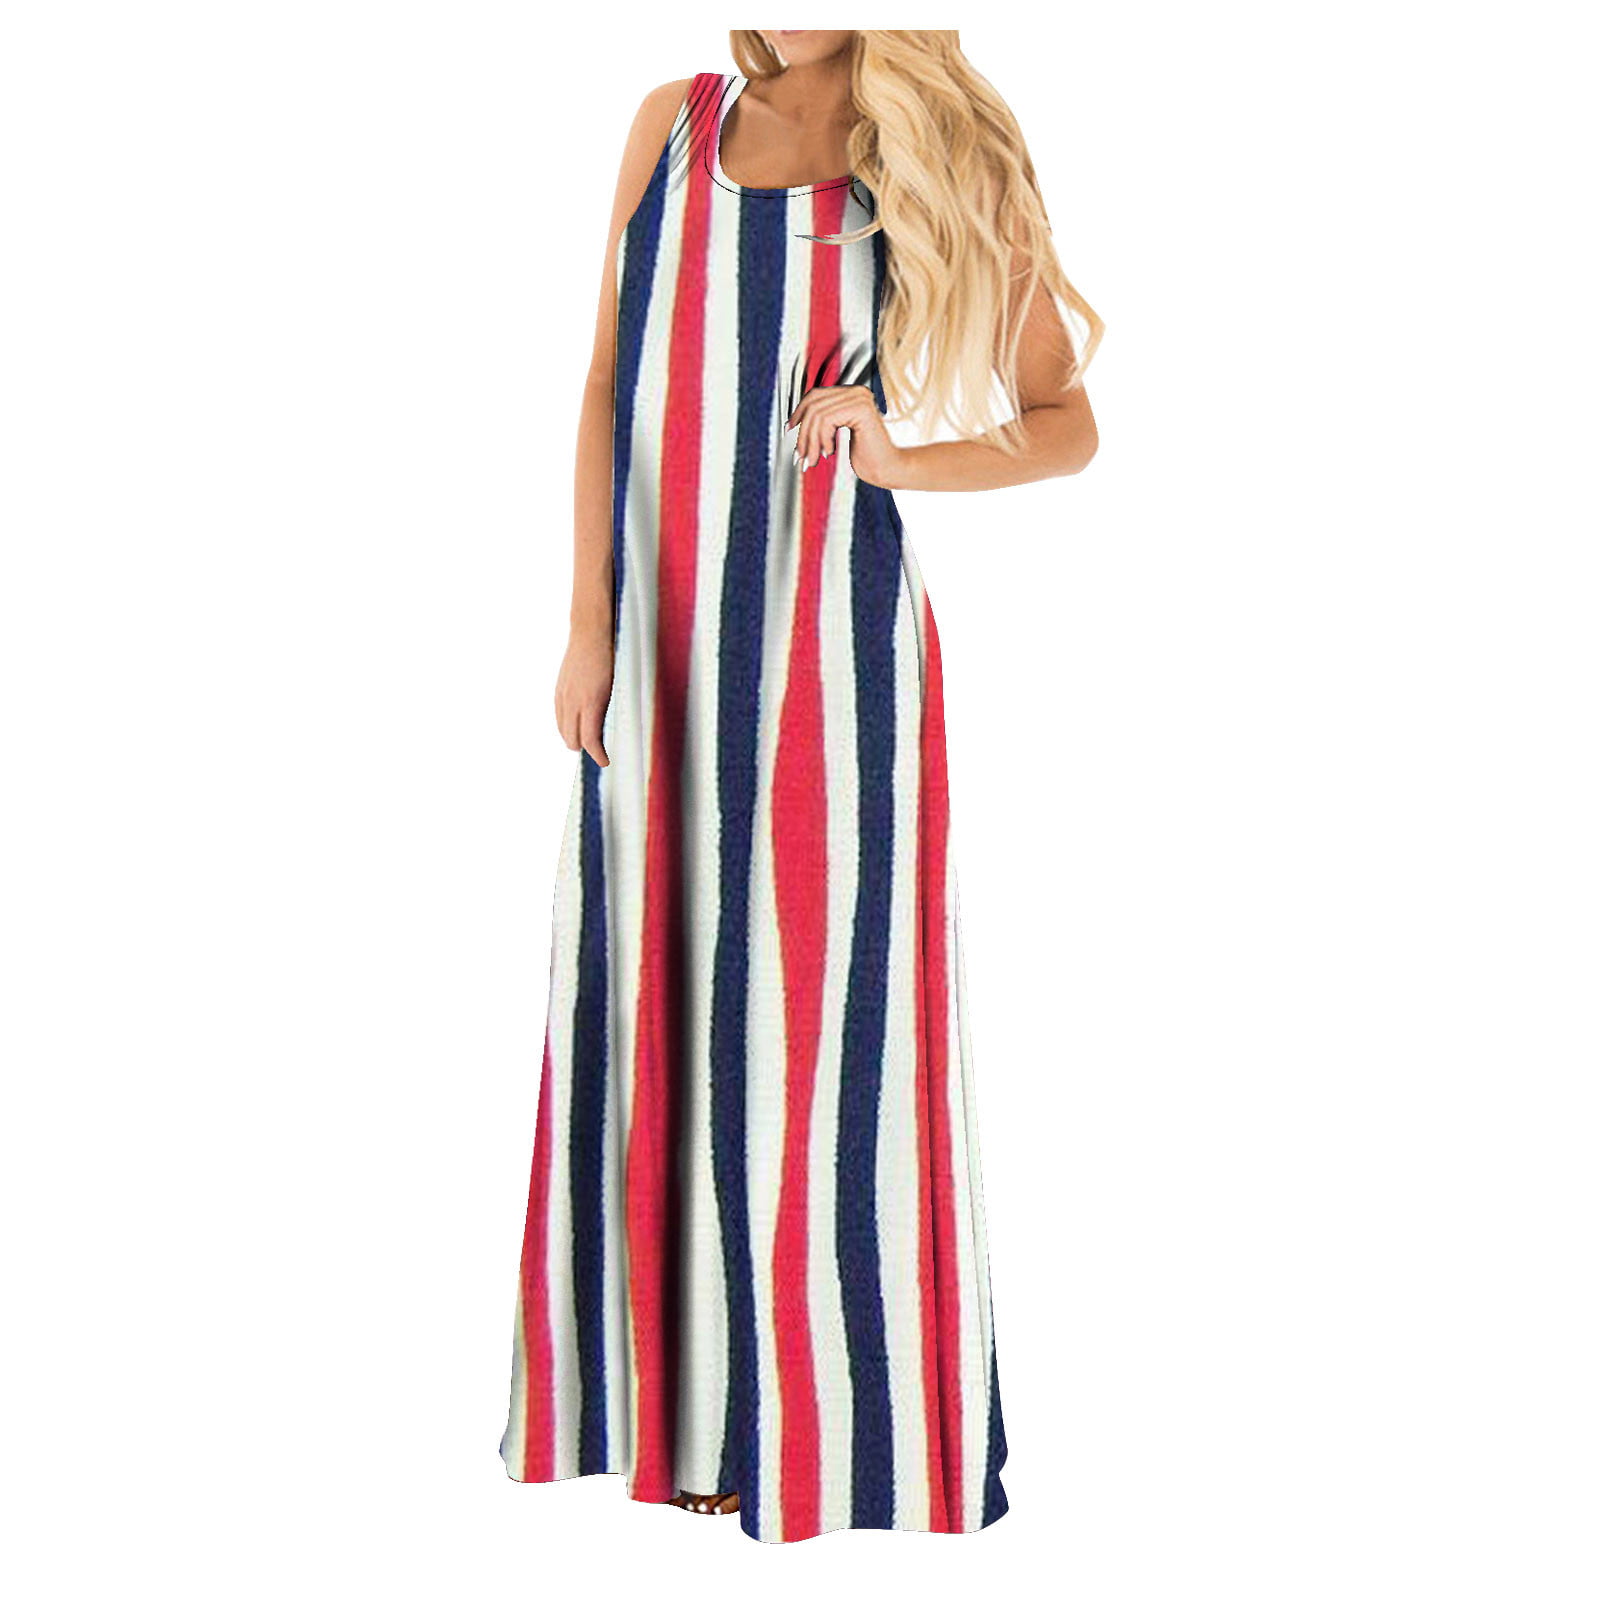 Womens Casual Independence Day Sleeveless O-Neck Print Maxi Tank Long Dress Plus Size Dresses for Women Casual Summer 